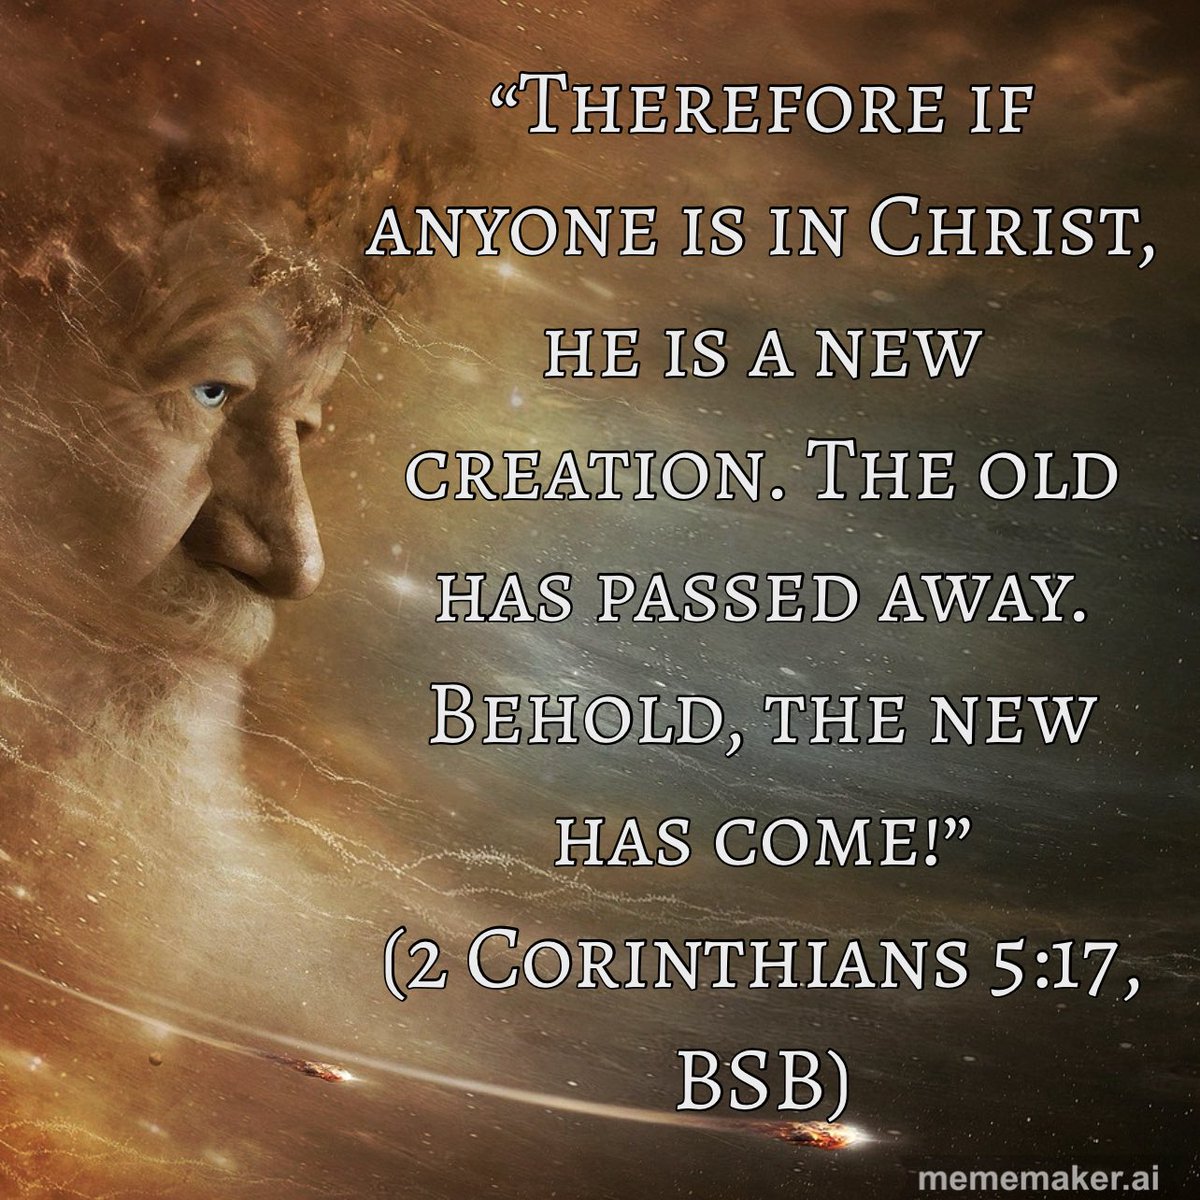 “Therefore if anyone is in Christ, he is a #newcreation. The old has passed away. Behold, the new has come!” (2 Corinthians 5:17, BSB)